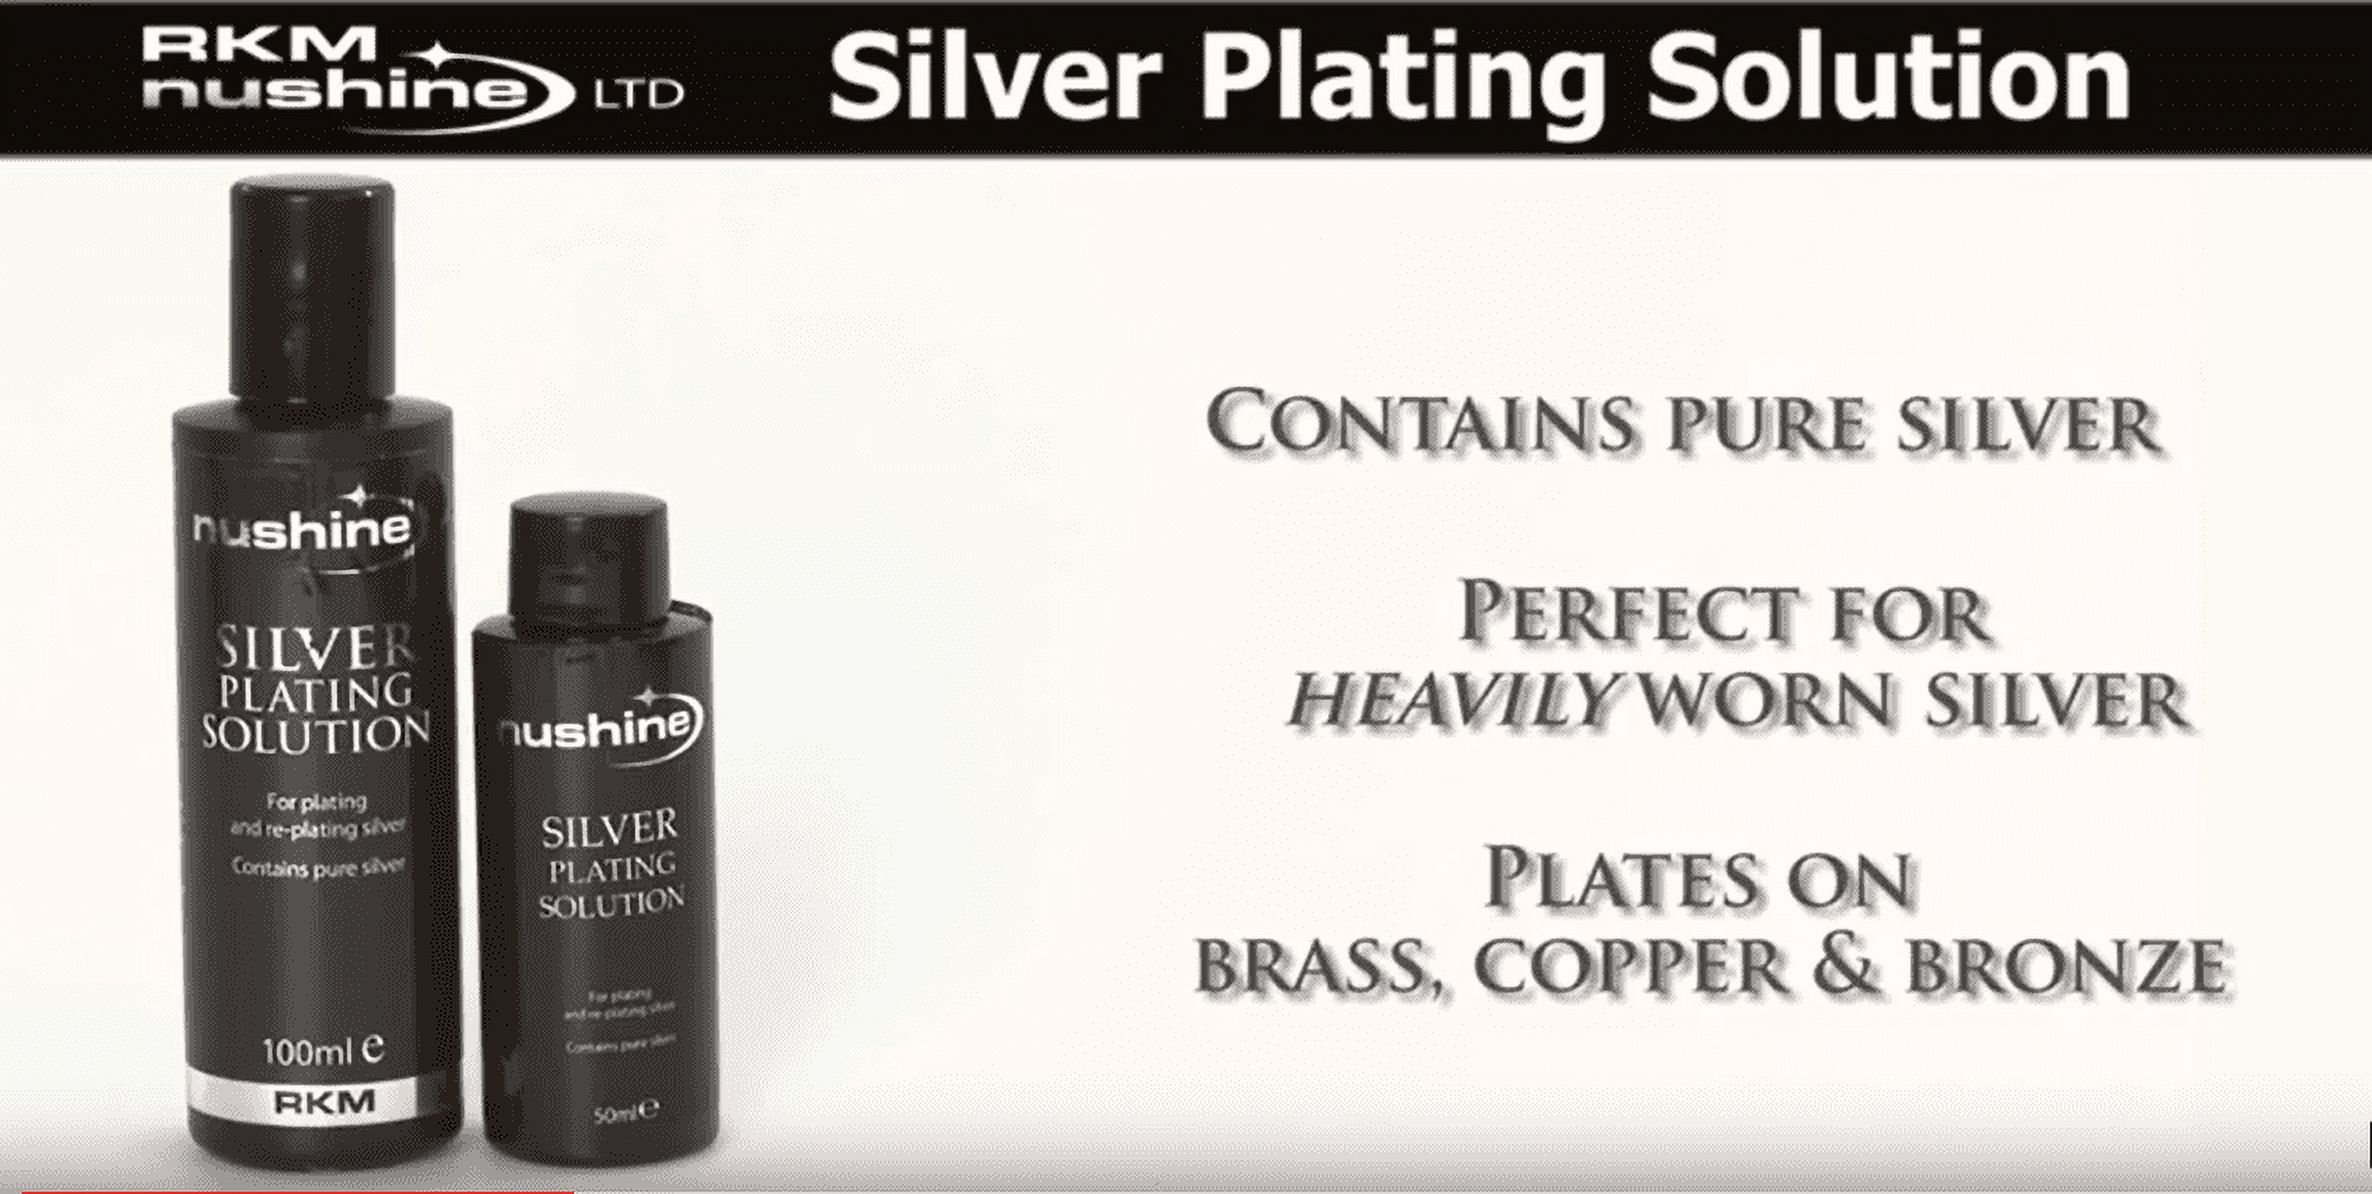 Nushine Silver Plating Solution 1.7 Oz - Permanently Plate Pure Silver onto  Worn Silver, Brass, Copper and Bronze (ecofriendly Formula) 